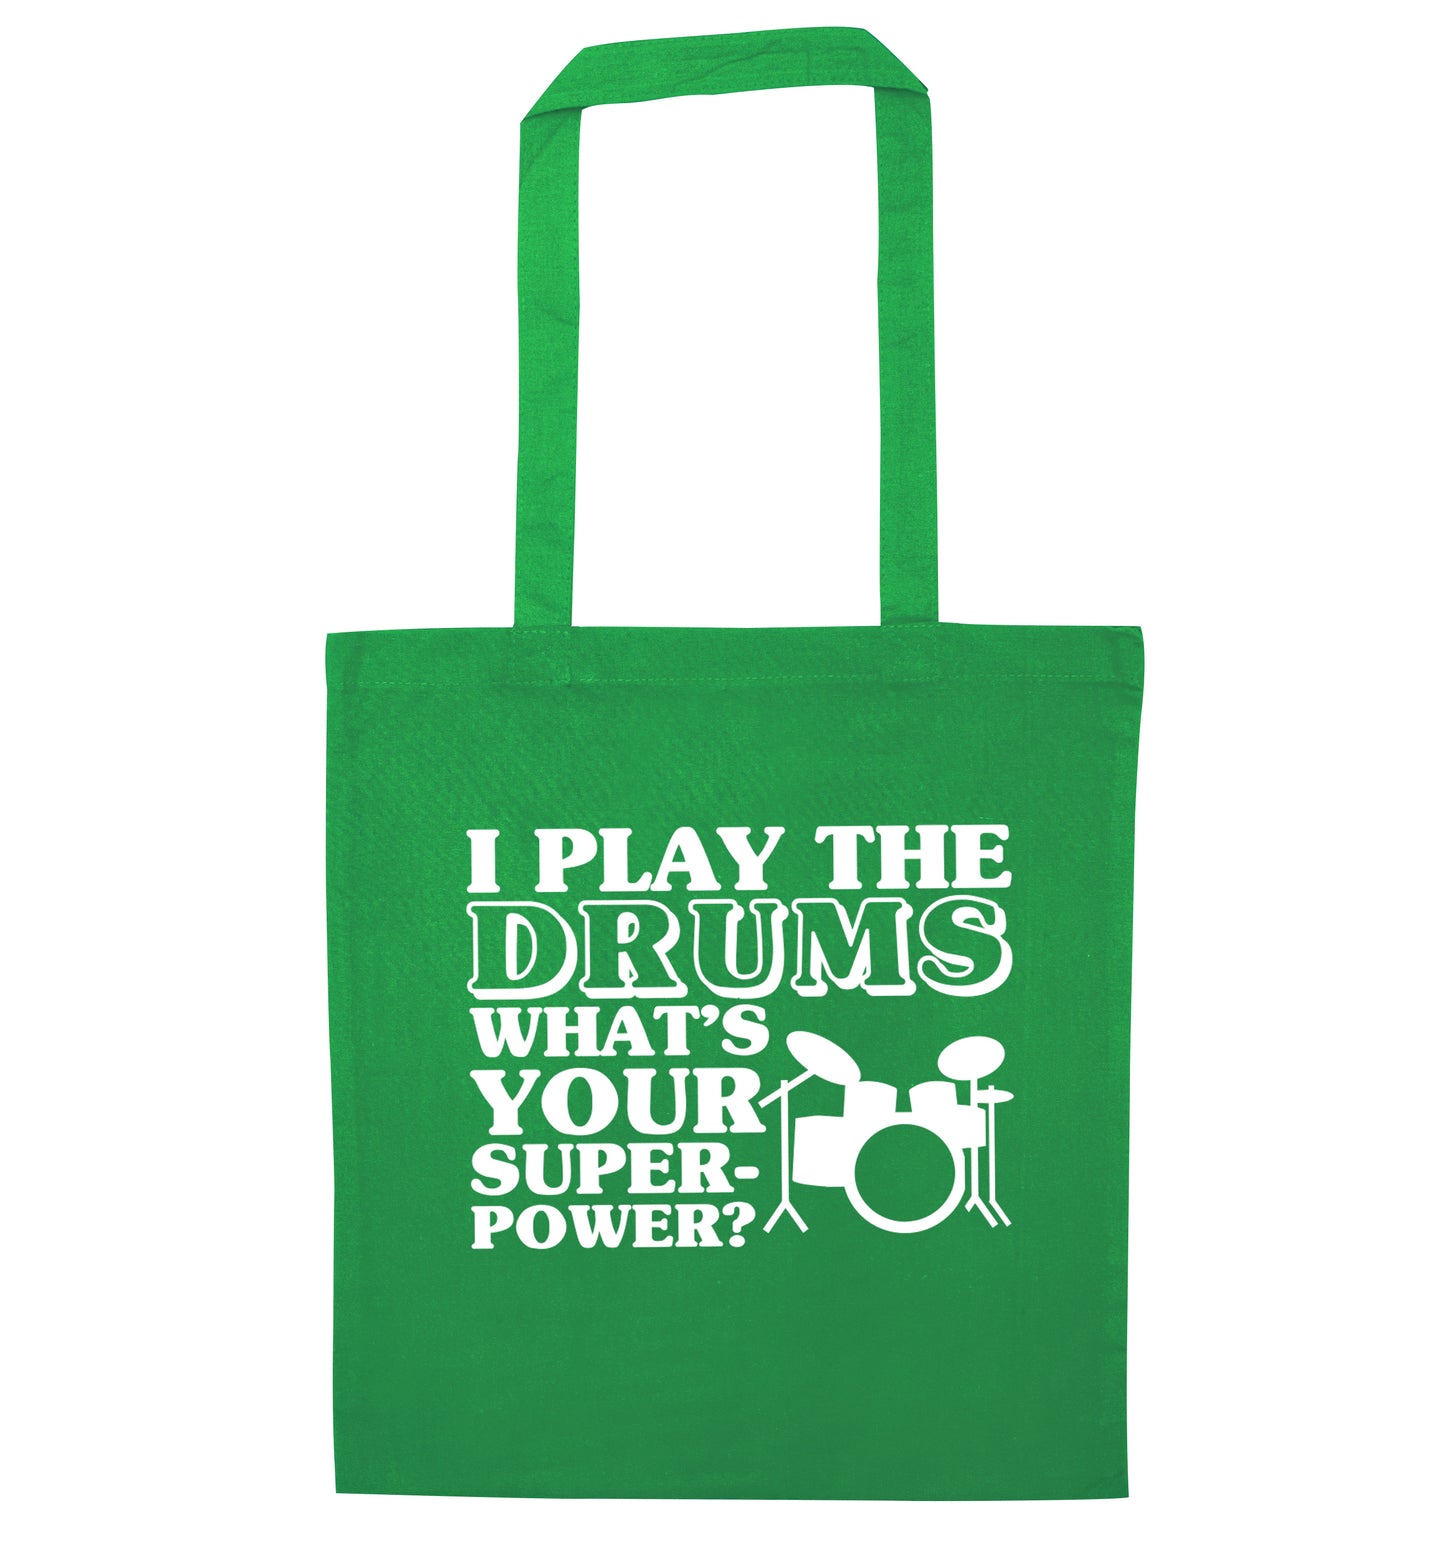 I play the drums what's your superpower? green tote bag